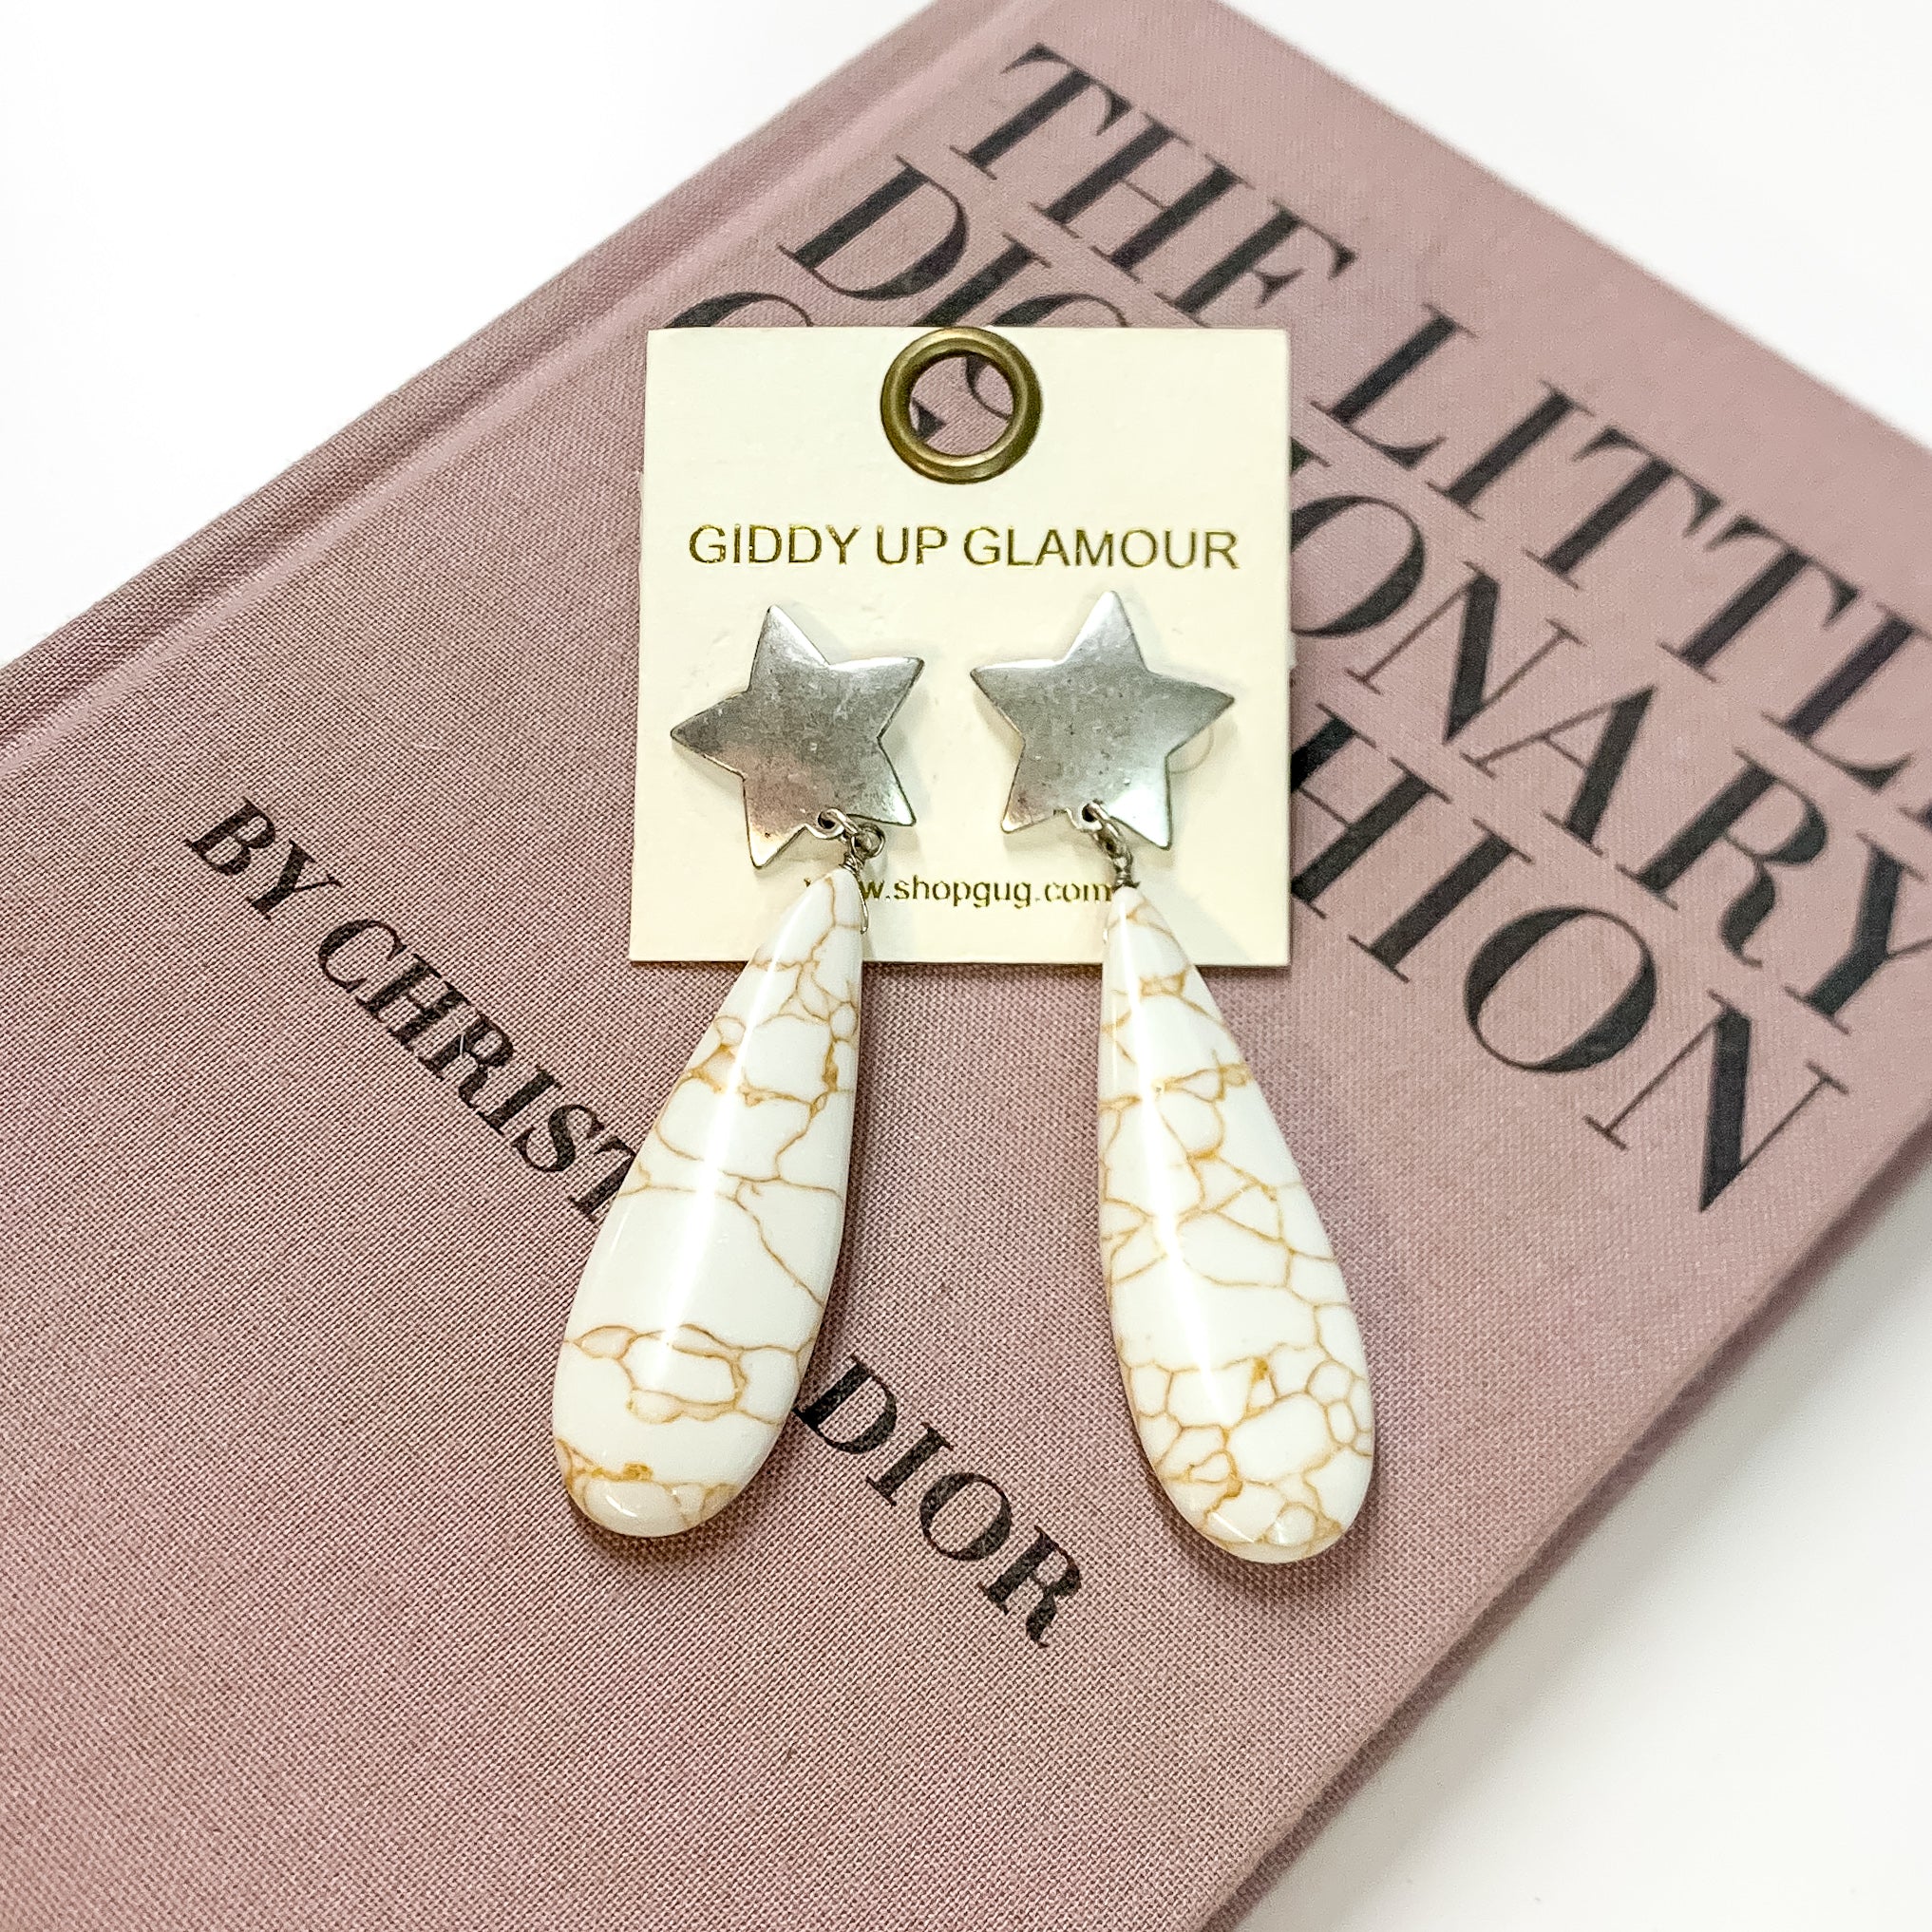 Shoot For The Stars Stone Post Earrings in White - Giddy Up Glamour Boutique